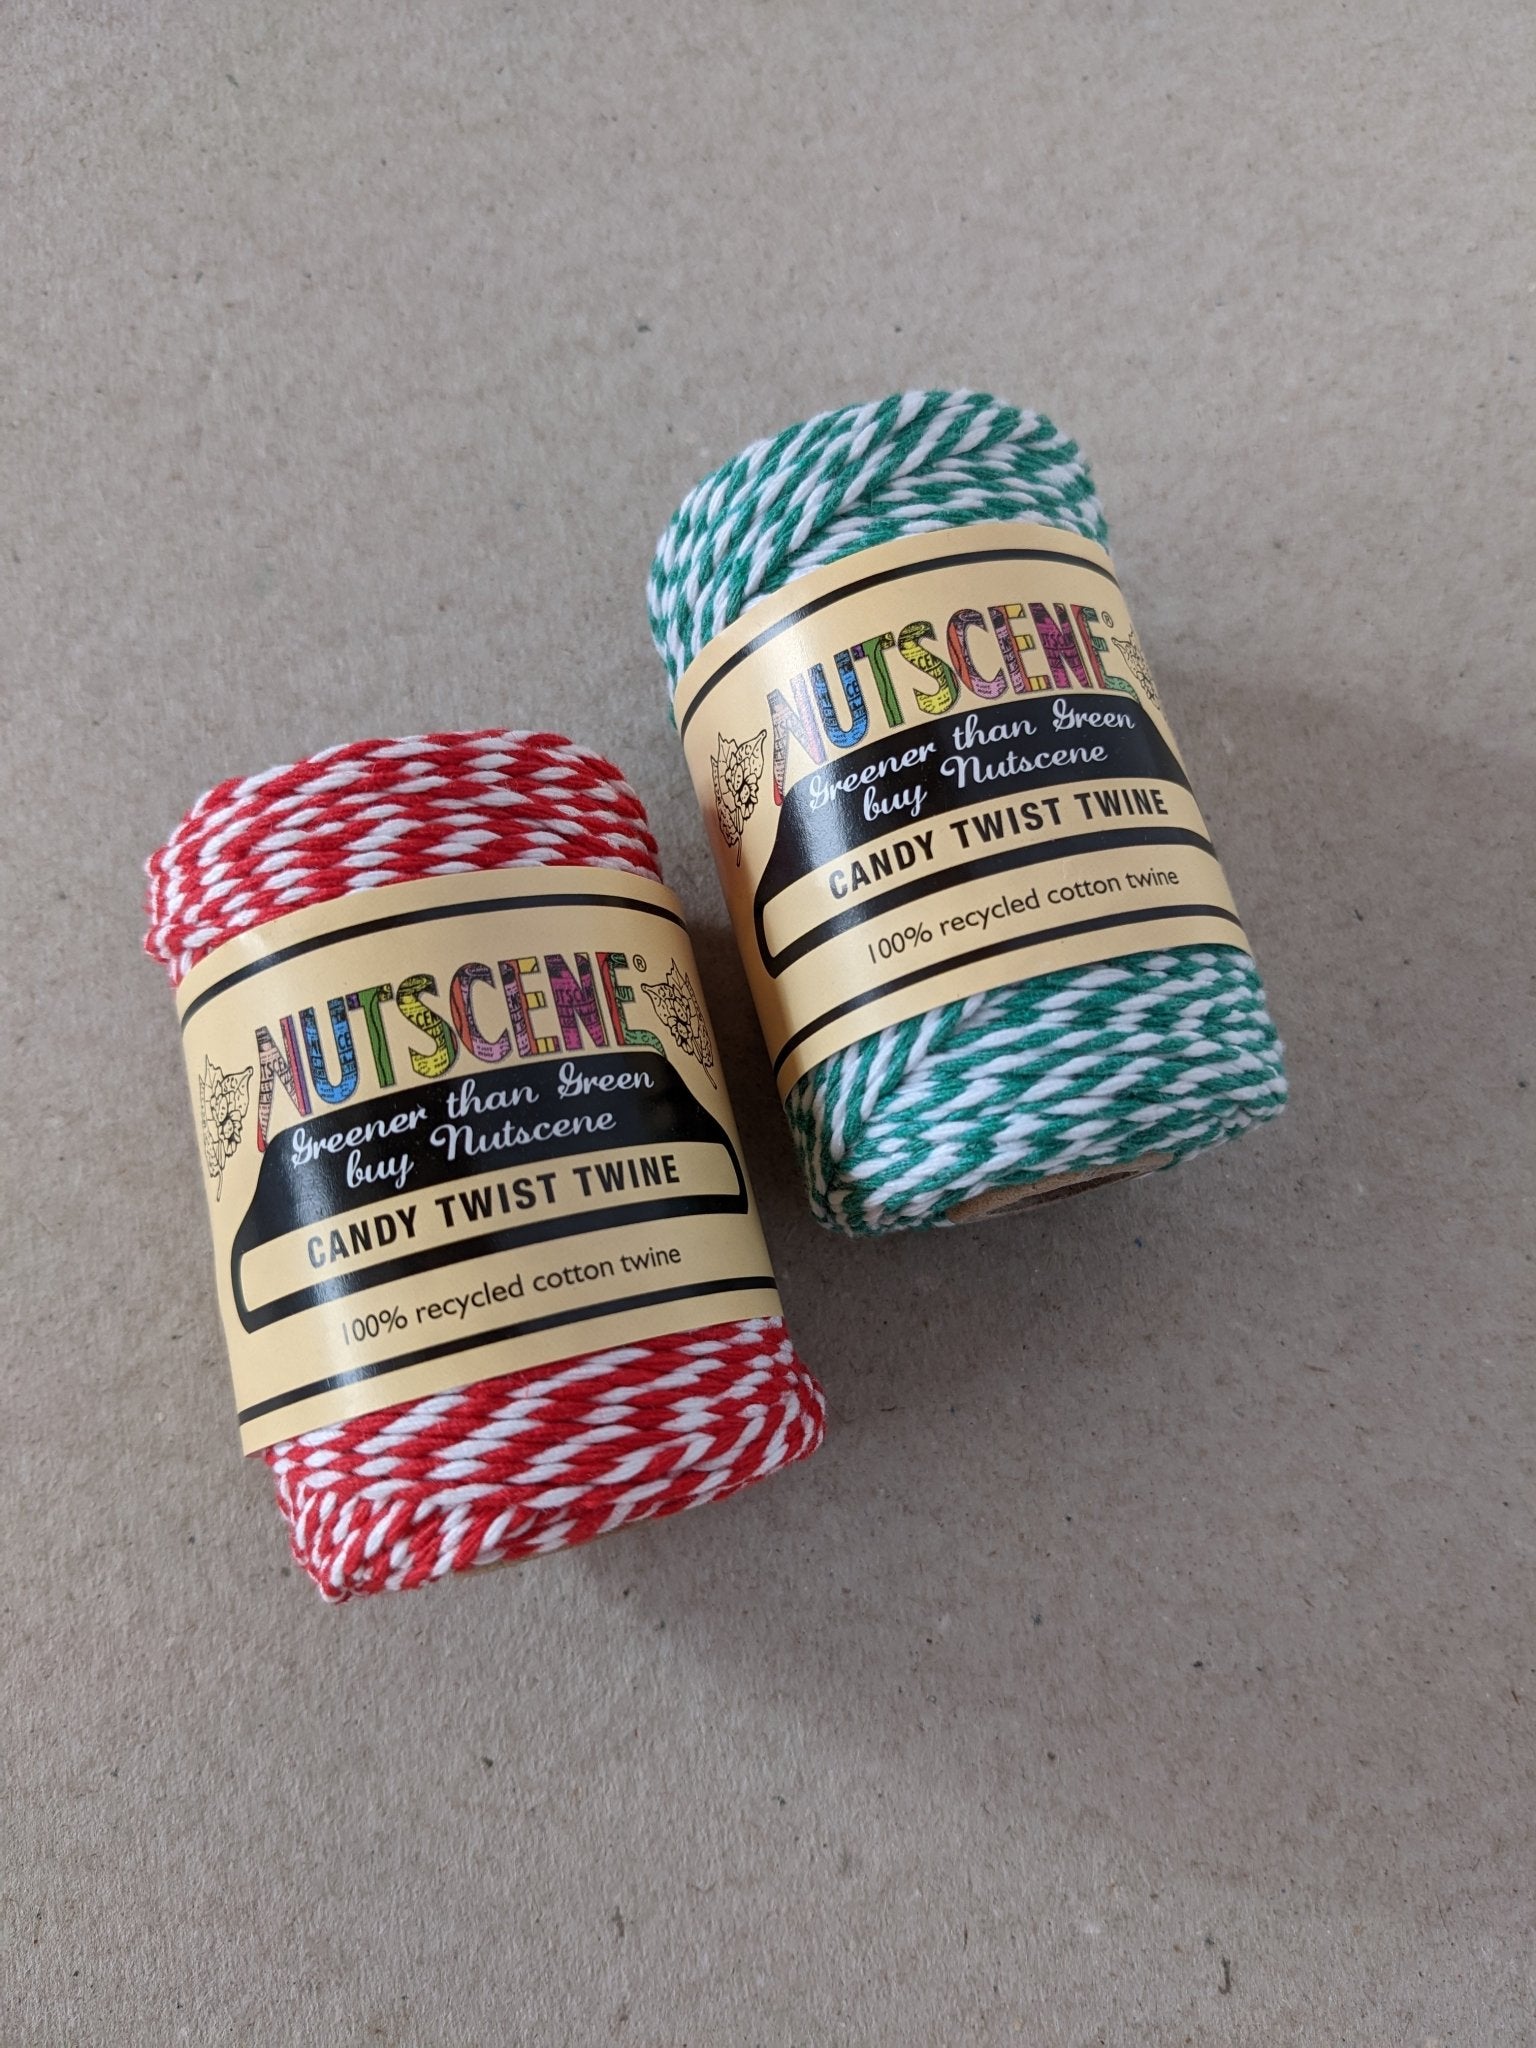 Nutscene Recycled Cotton Twine - The Stationery Cupboard